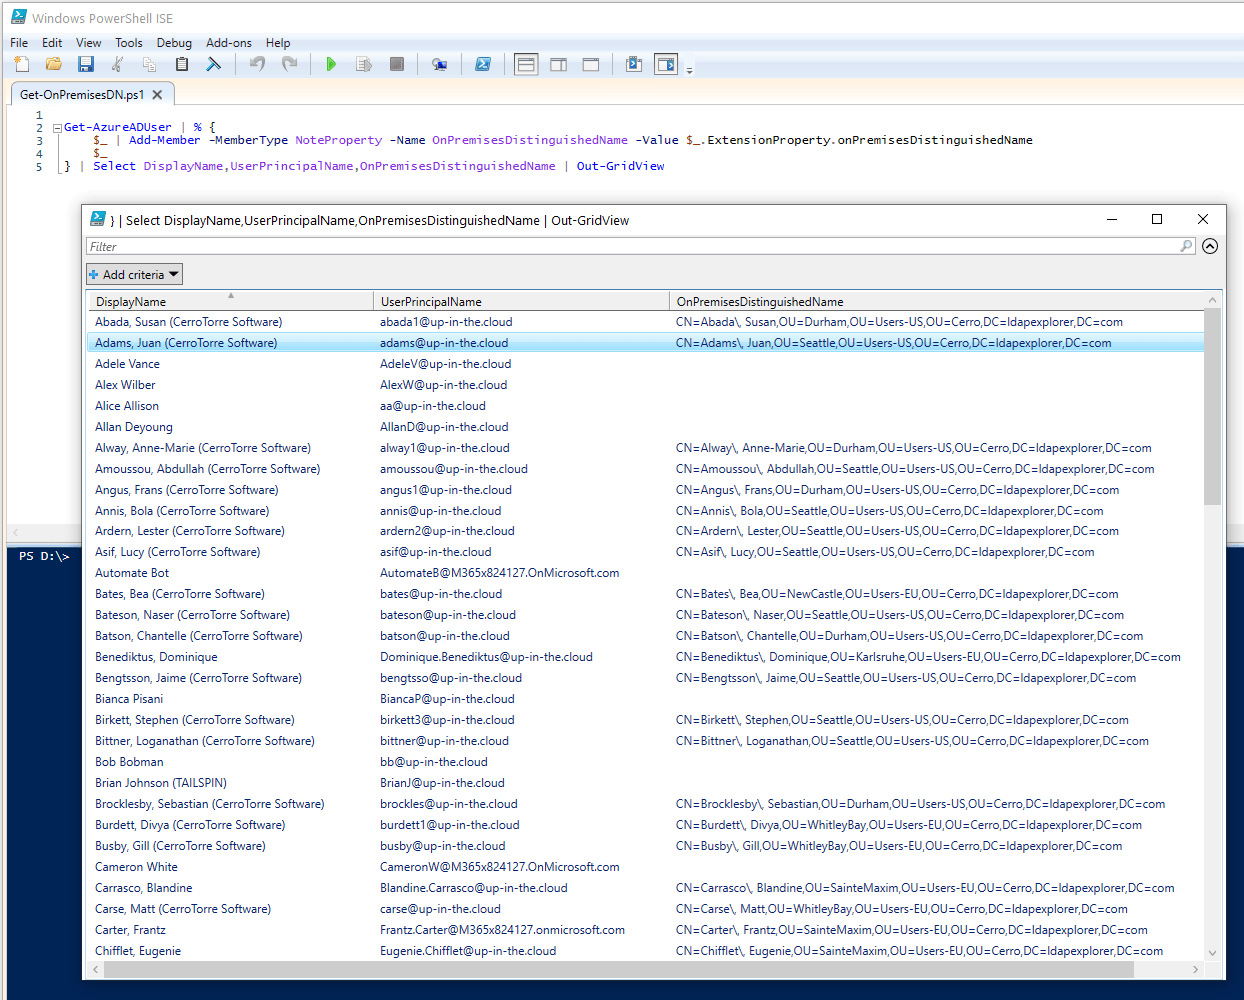 Screenshot with PowserShell ISE, creating a user proptery with the onPremisesDistinguishedName